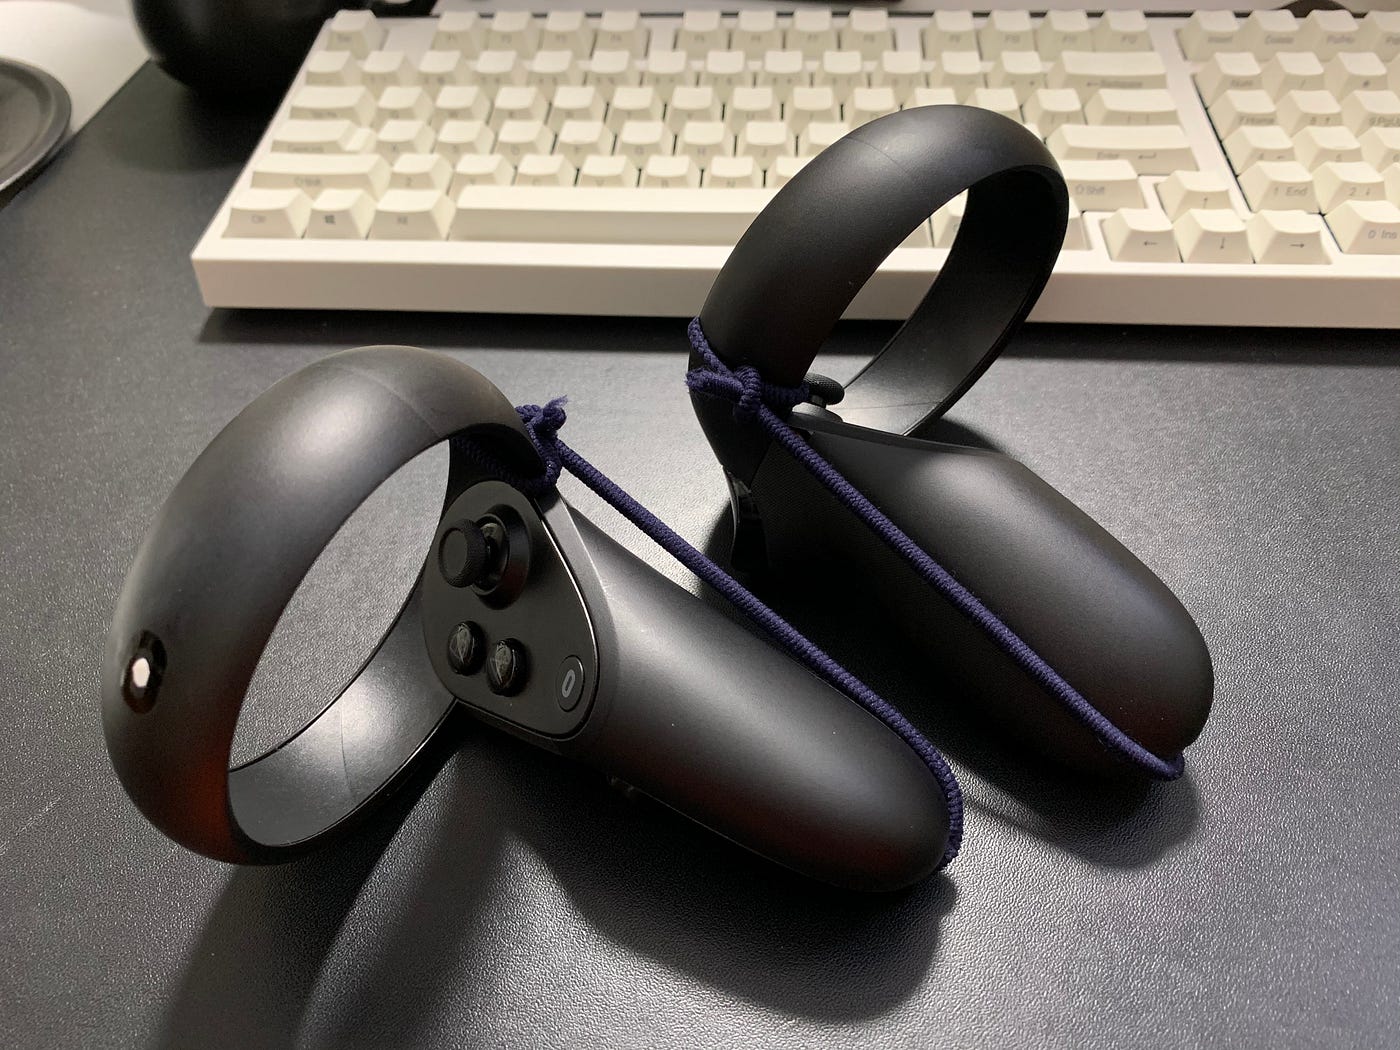 An easy/useful DIY of Oculus Touch controller | by Kim Lai | Medium